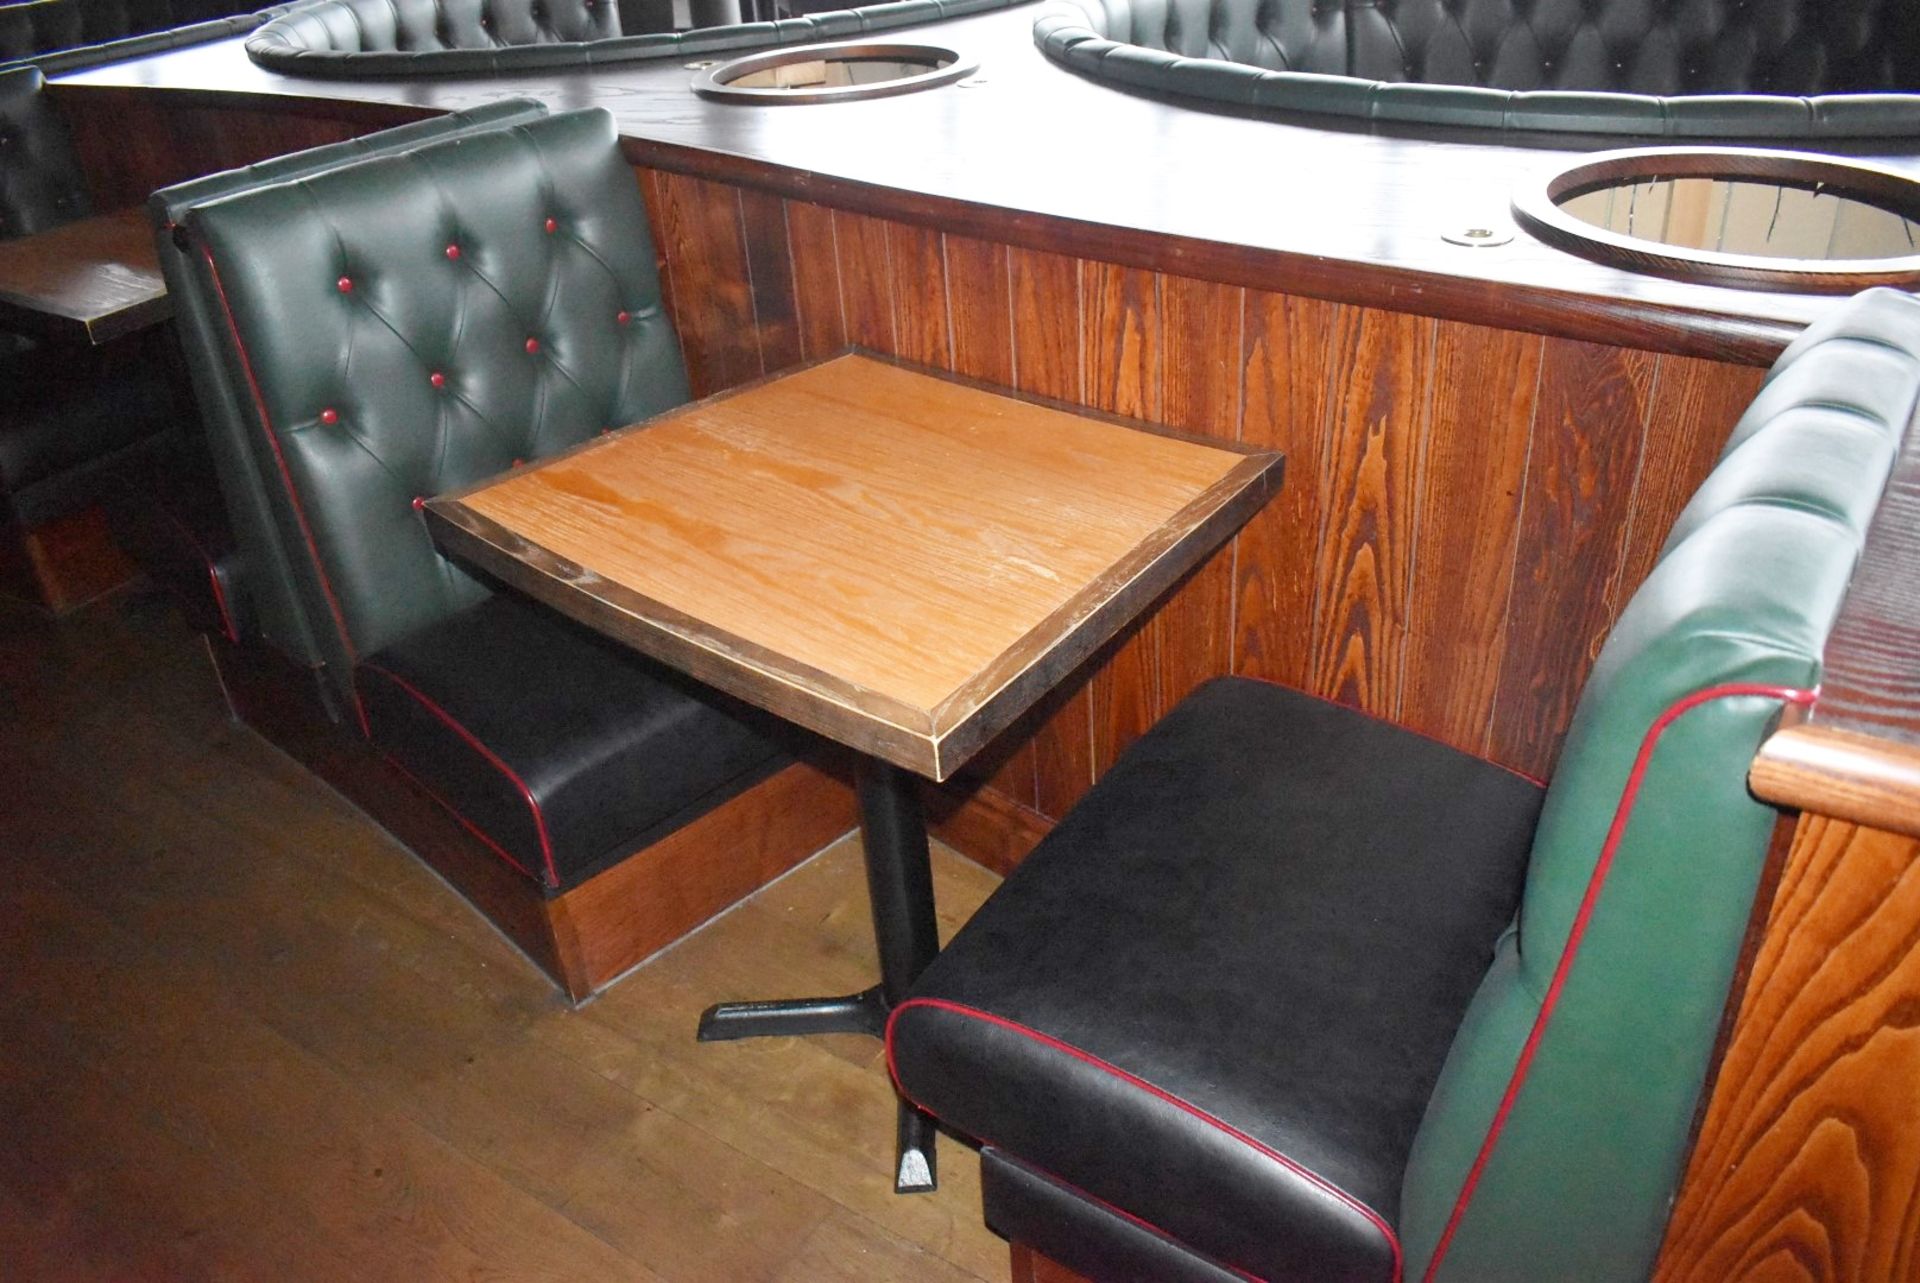 3 x Sections of Restaurant Single Seat Booth Seating With 2 x Tables - Image 5 of 9